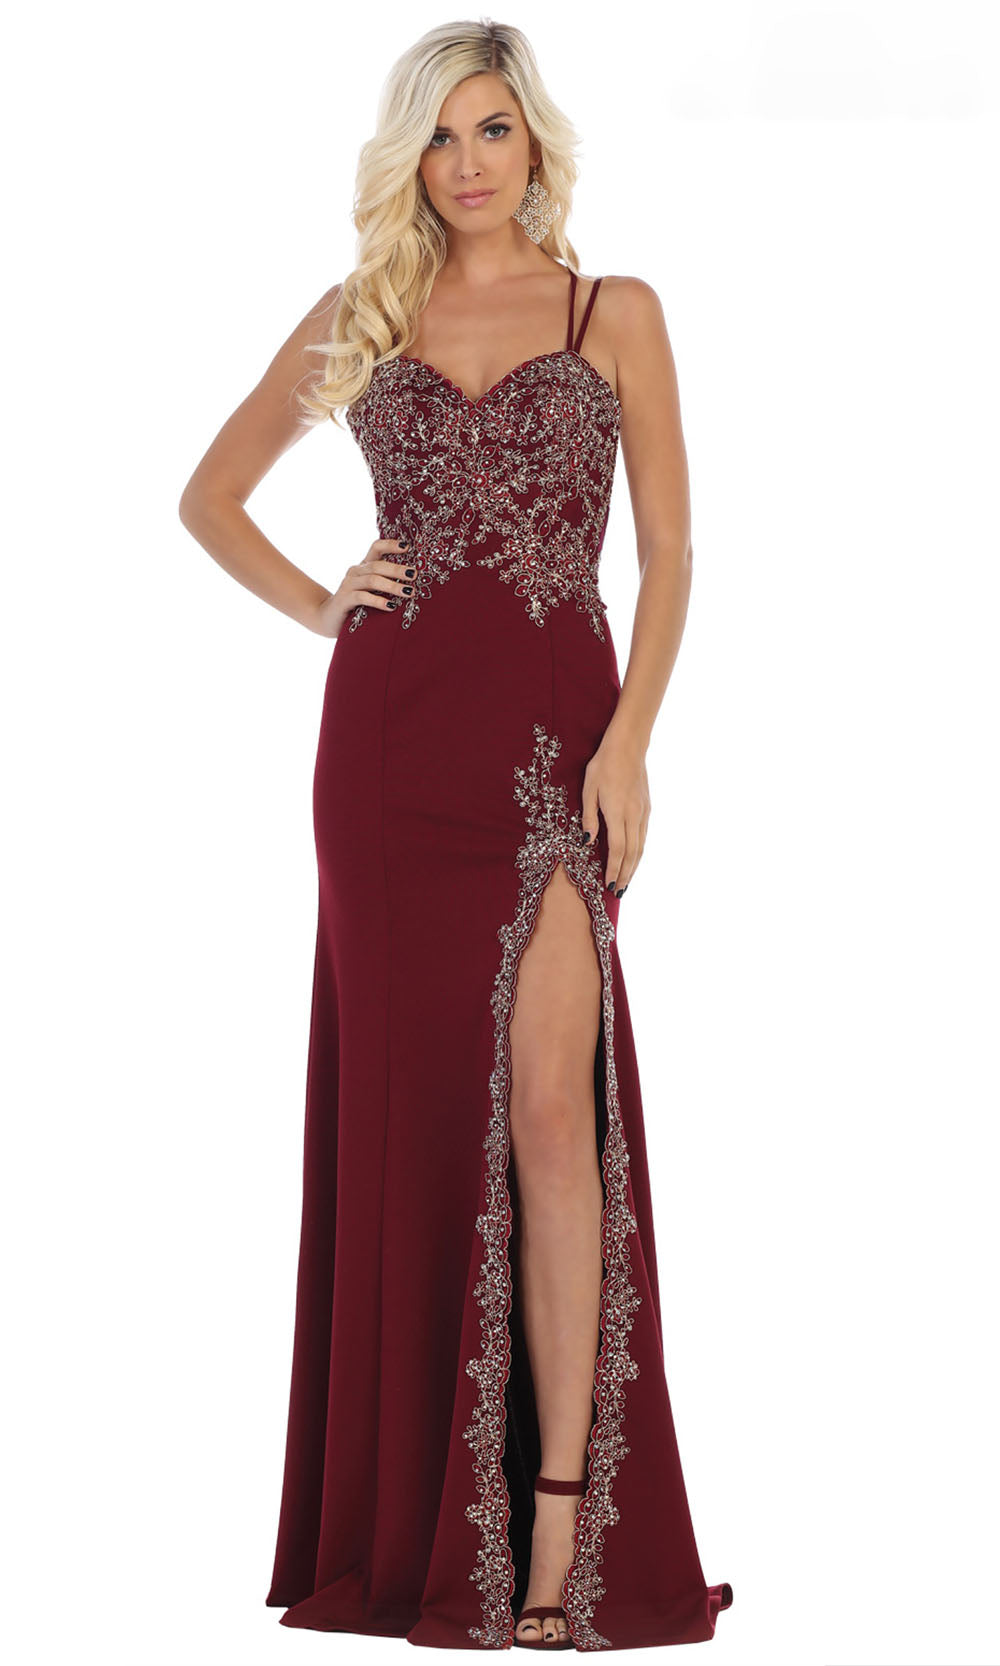 May Queen - MQ1633 Embellished Sweetheart Long Dress In Burgundy